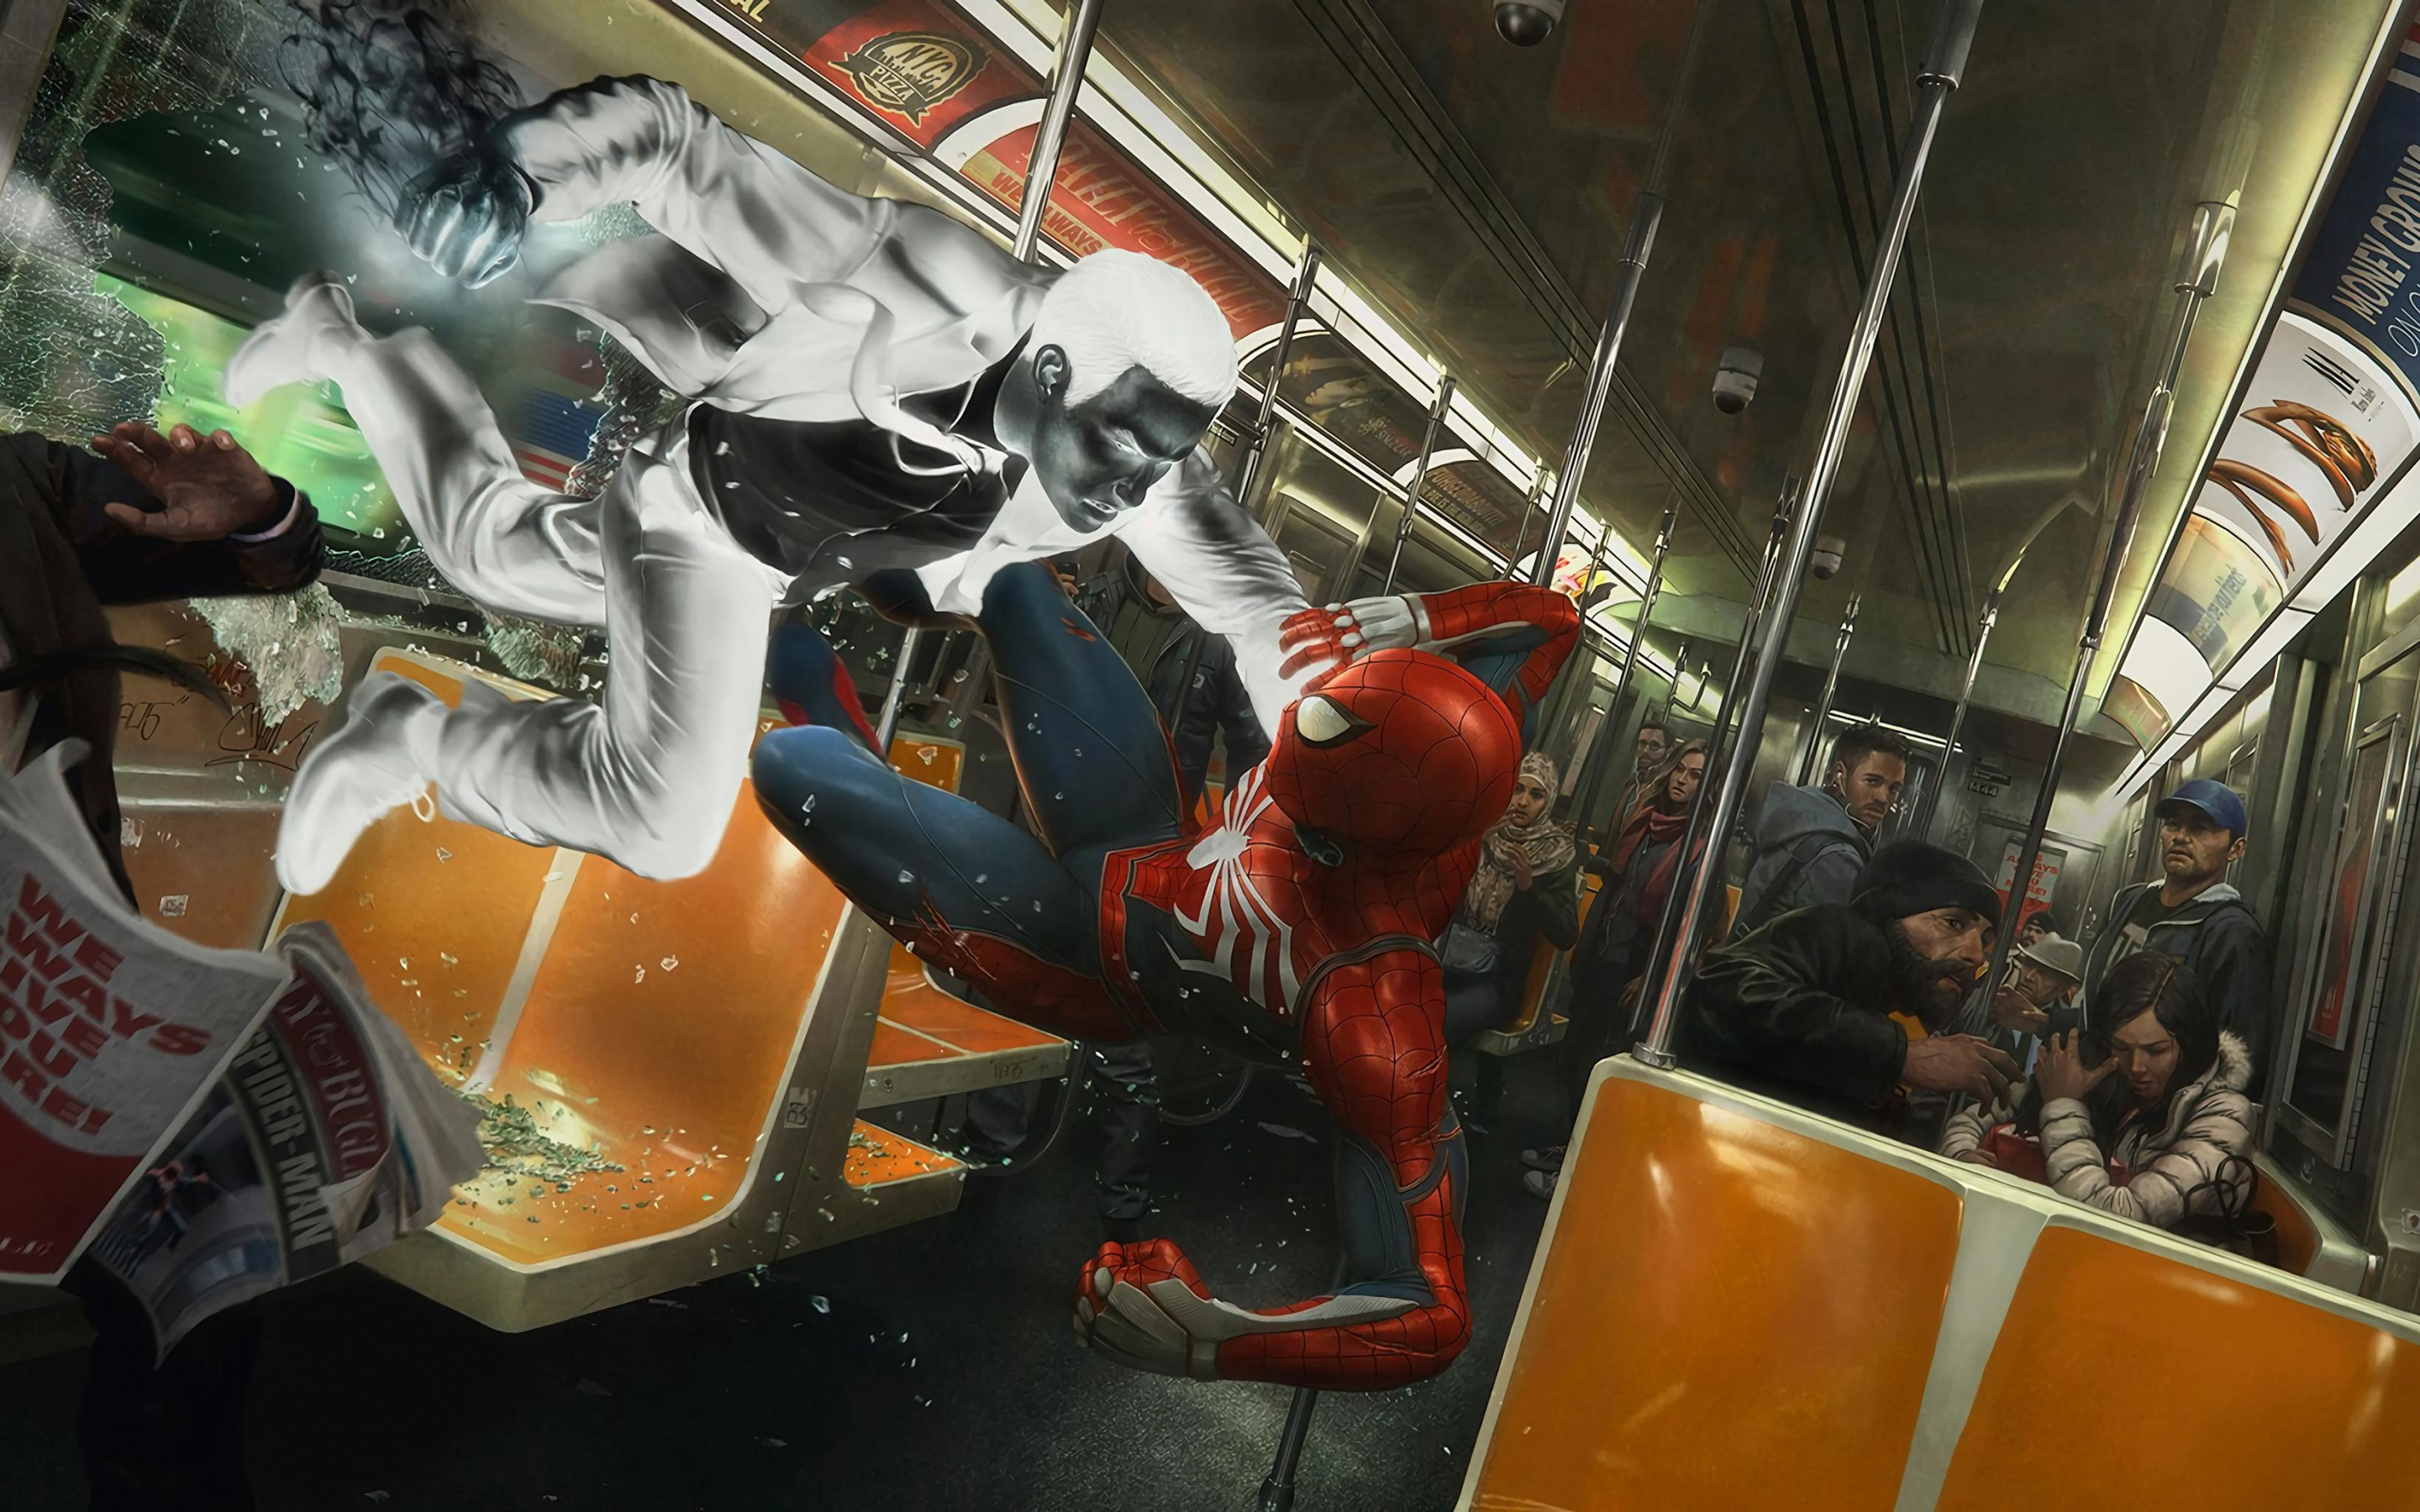 Spider-man (PS4), video game, fight, inside train, 2018, 2880x1800 wallpaper